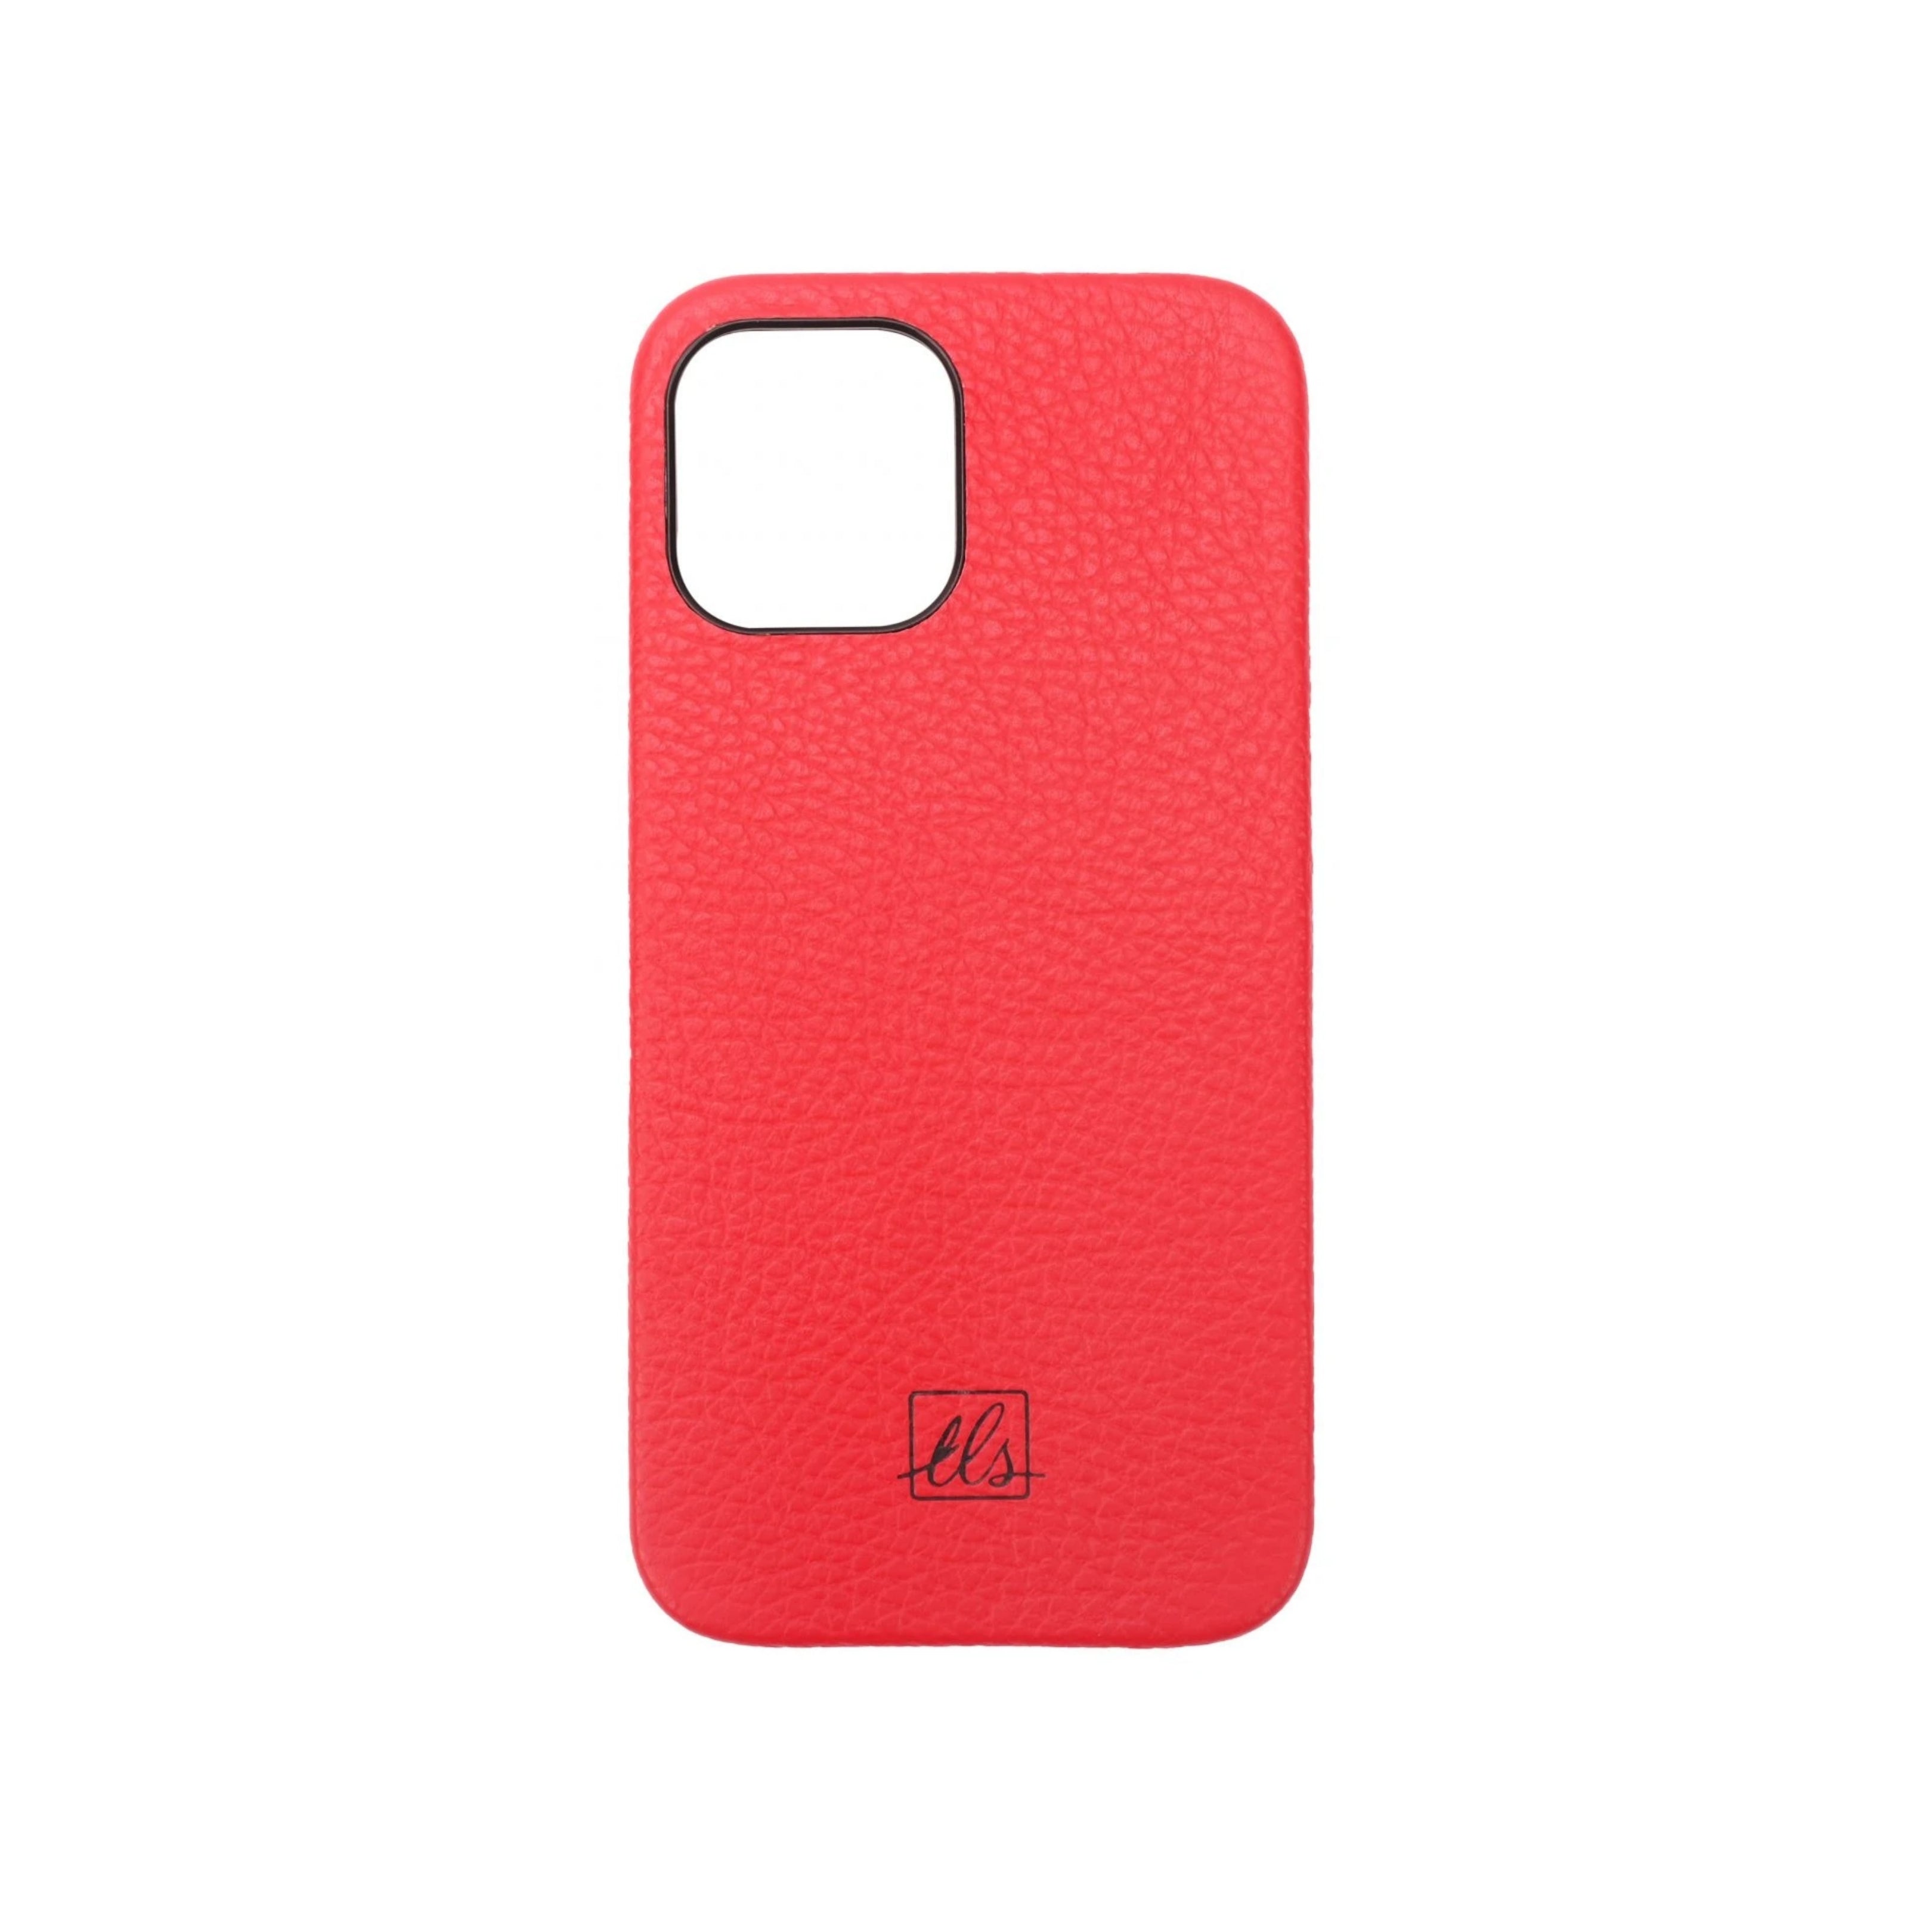 iPhone 12 Pro Max Leather cover